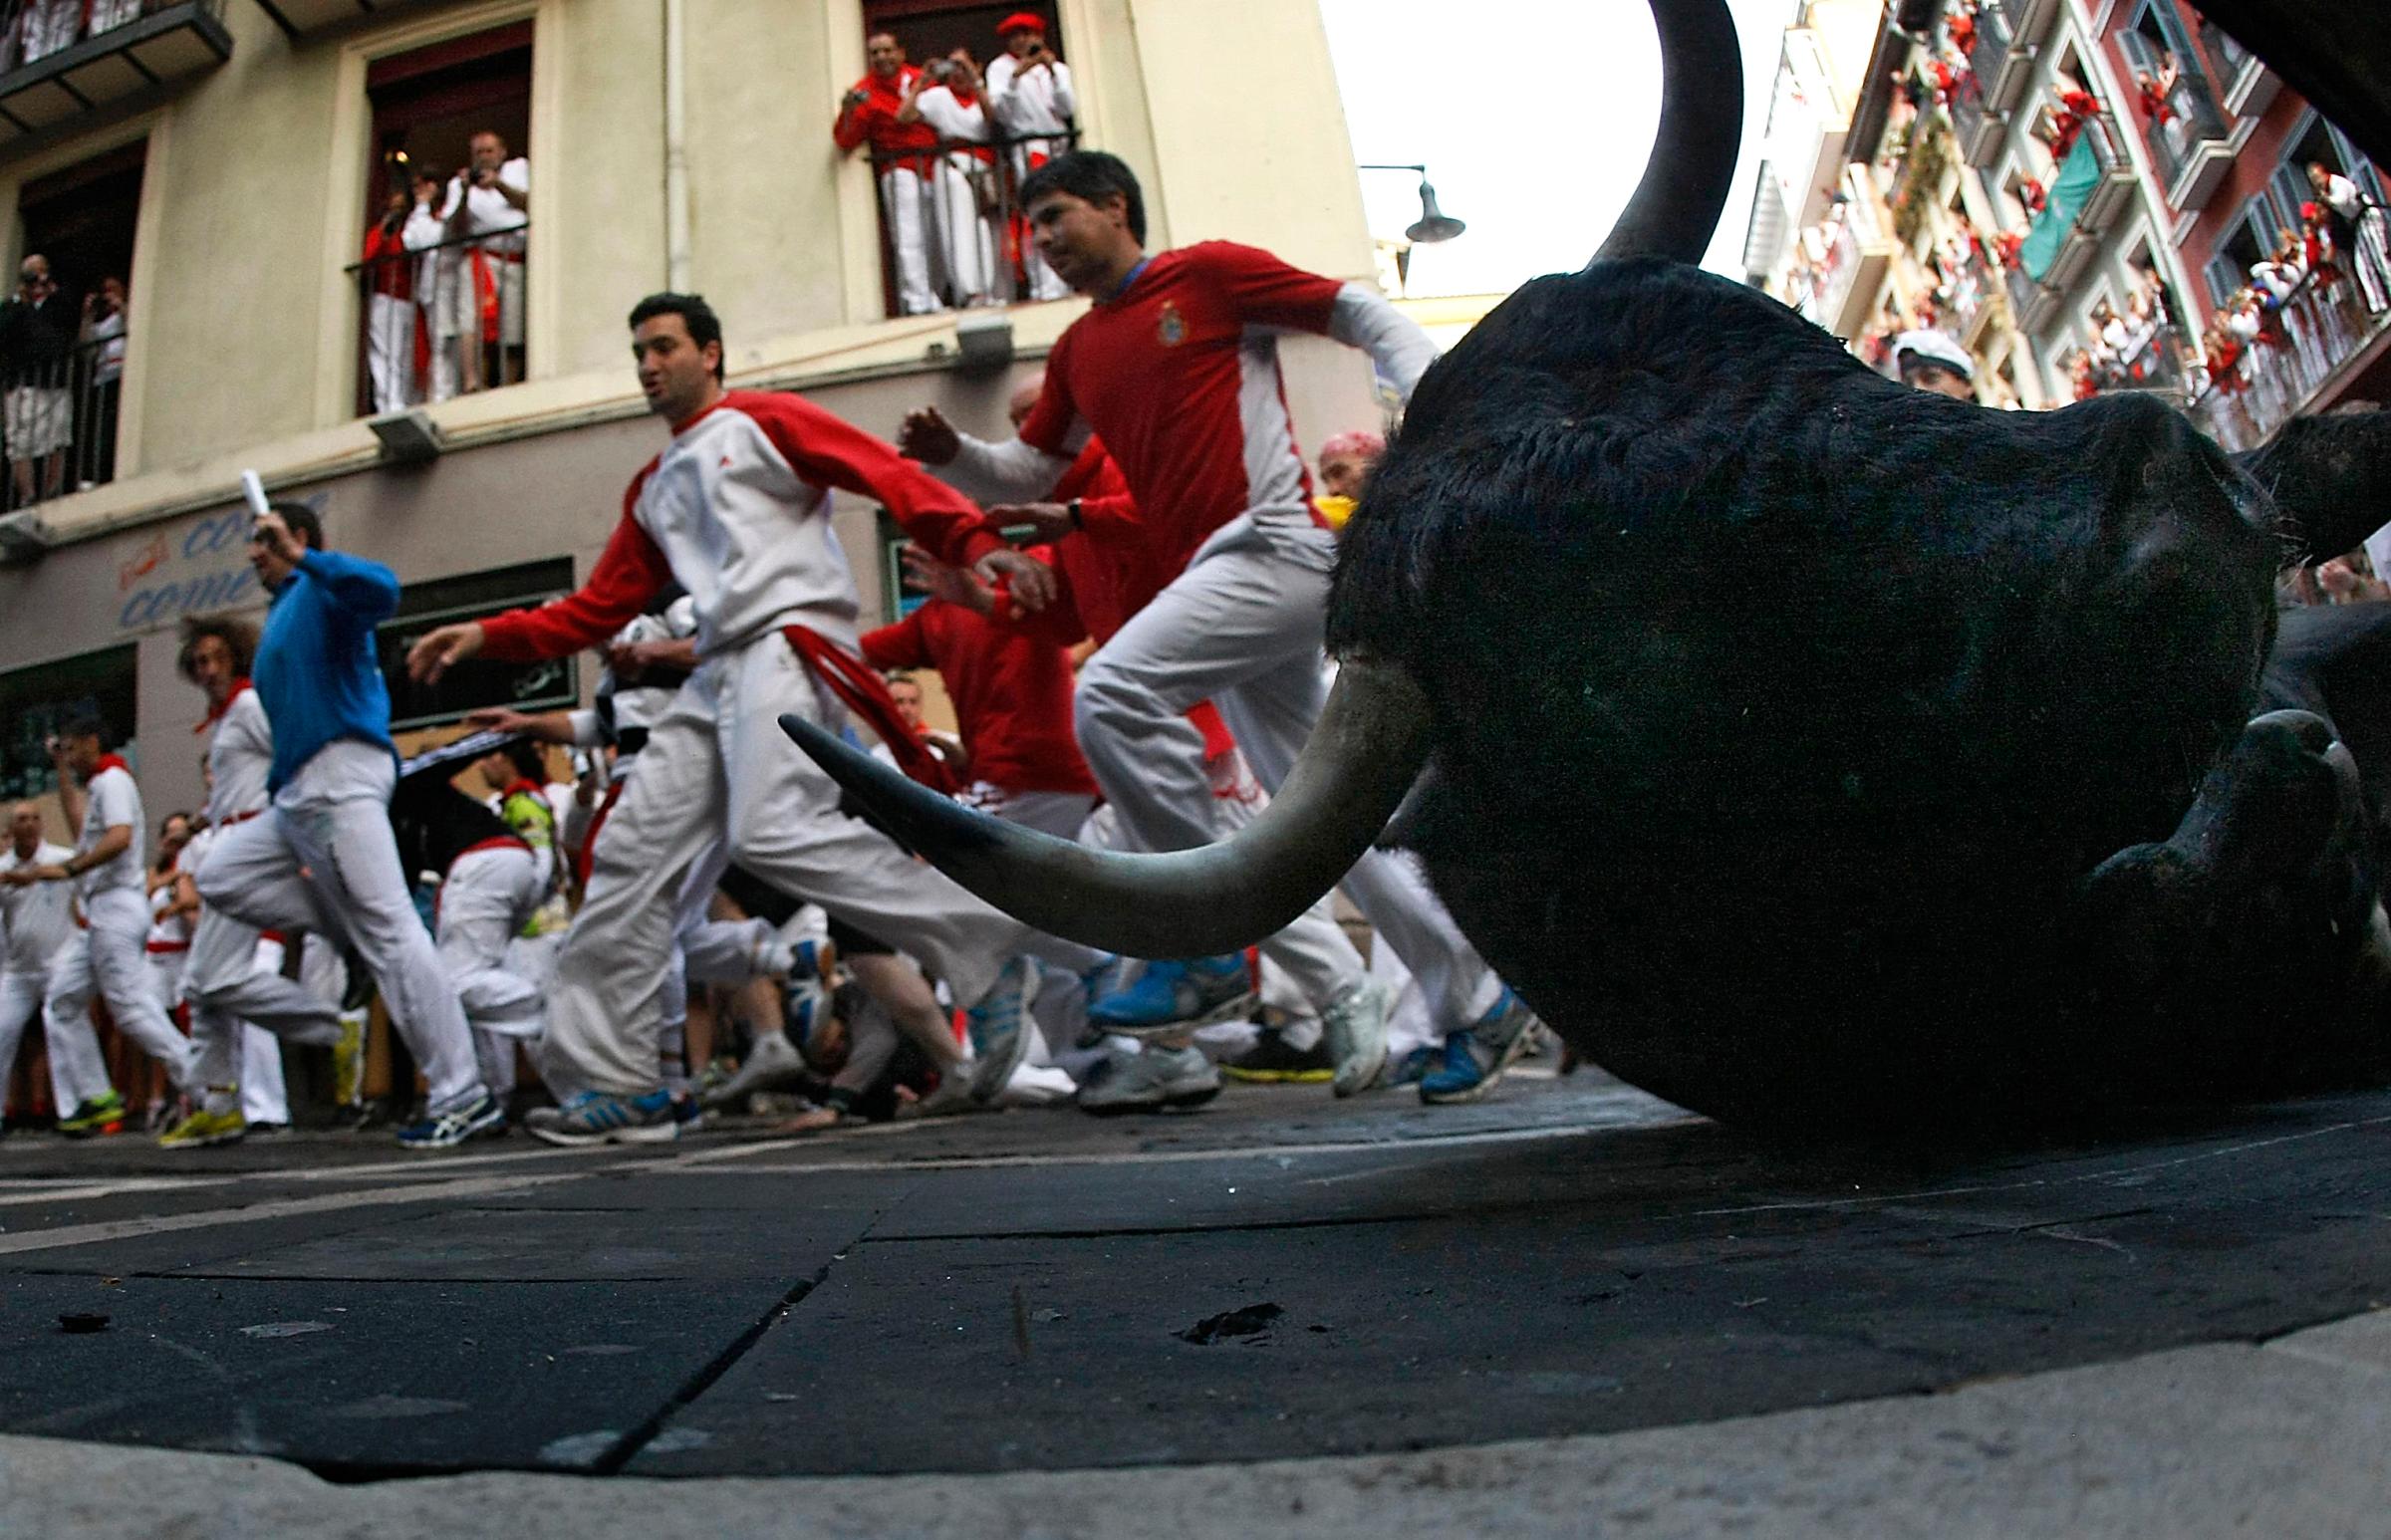 A fighting bull falls at the Estafeta corner, during the second running of the bulls of the San Fermin festival in Pamplona on July 8, 2014.